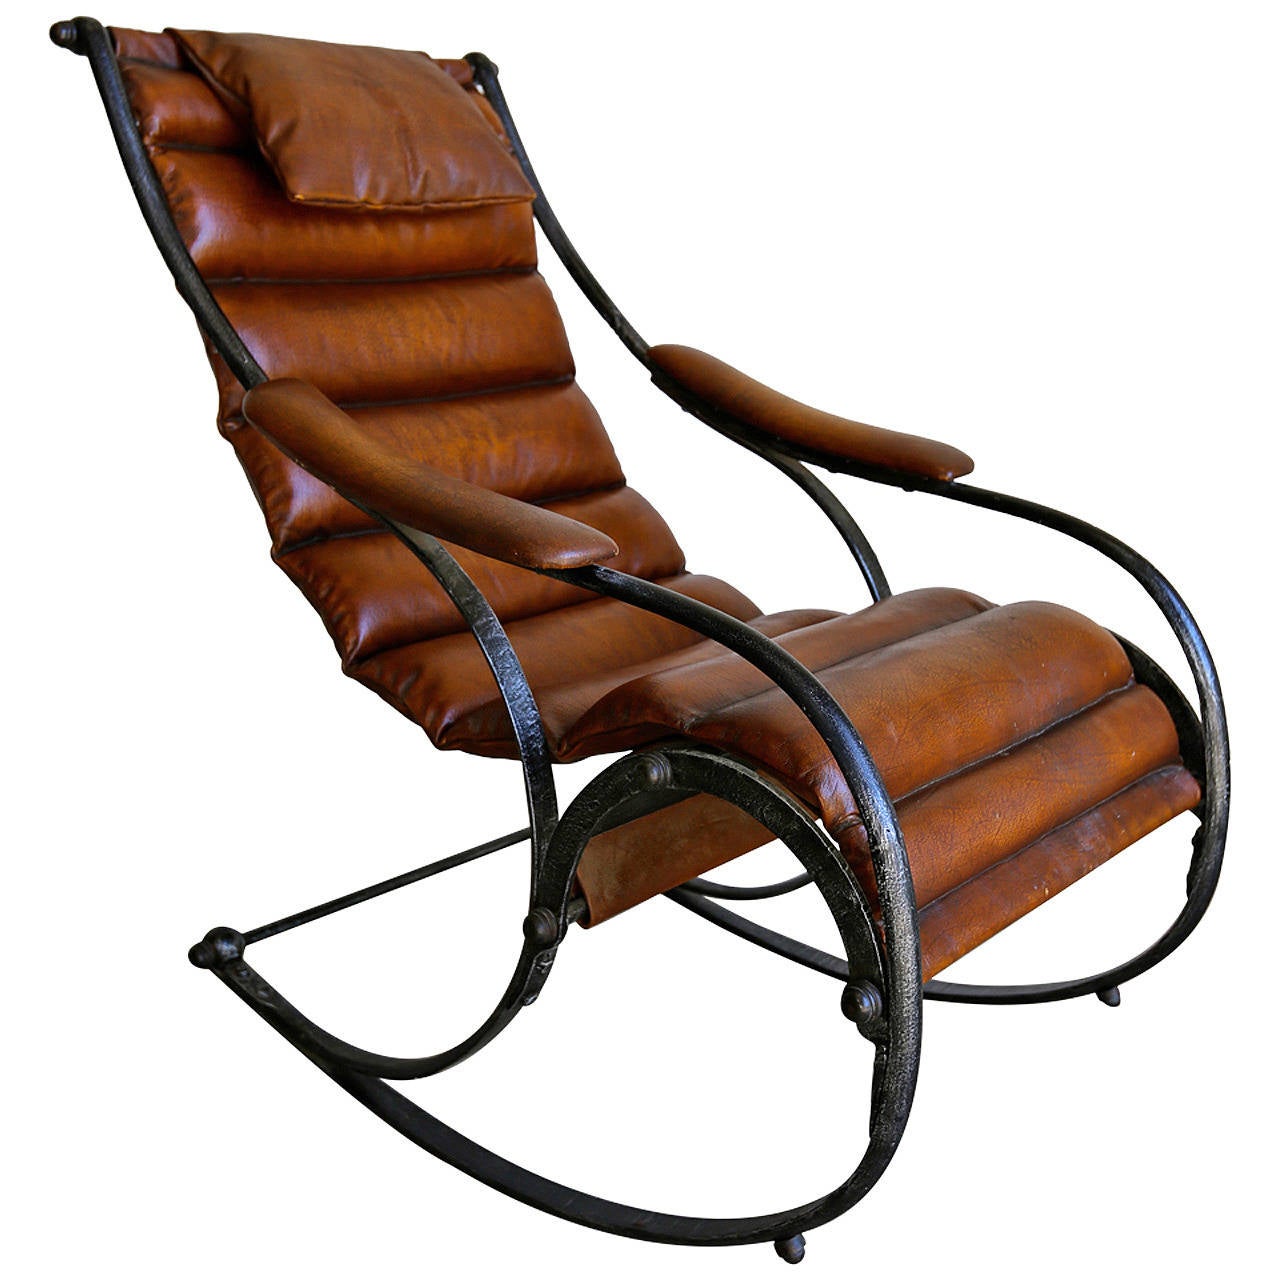 Sculptural Leather and Steel Rocking Chair at 1stdibs